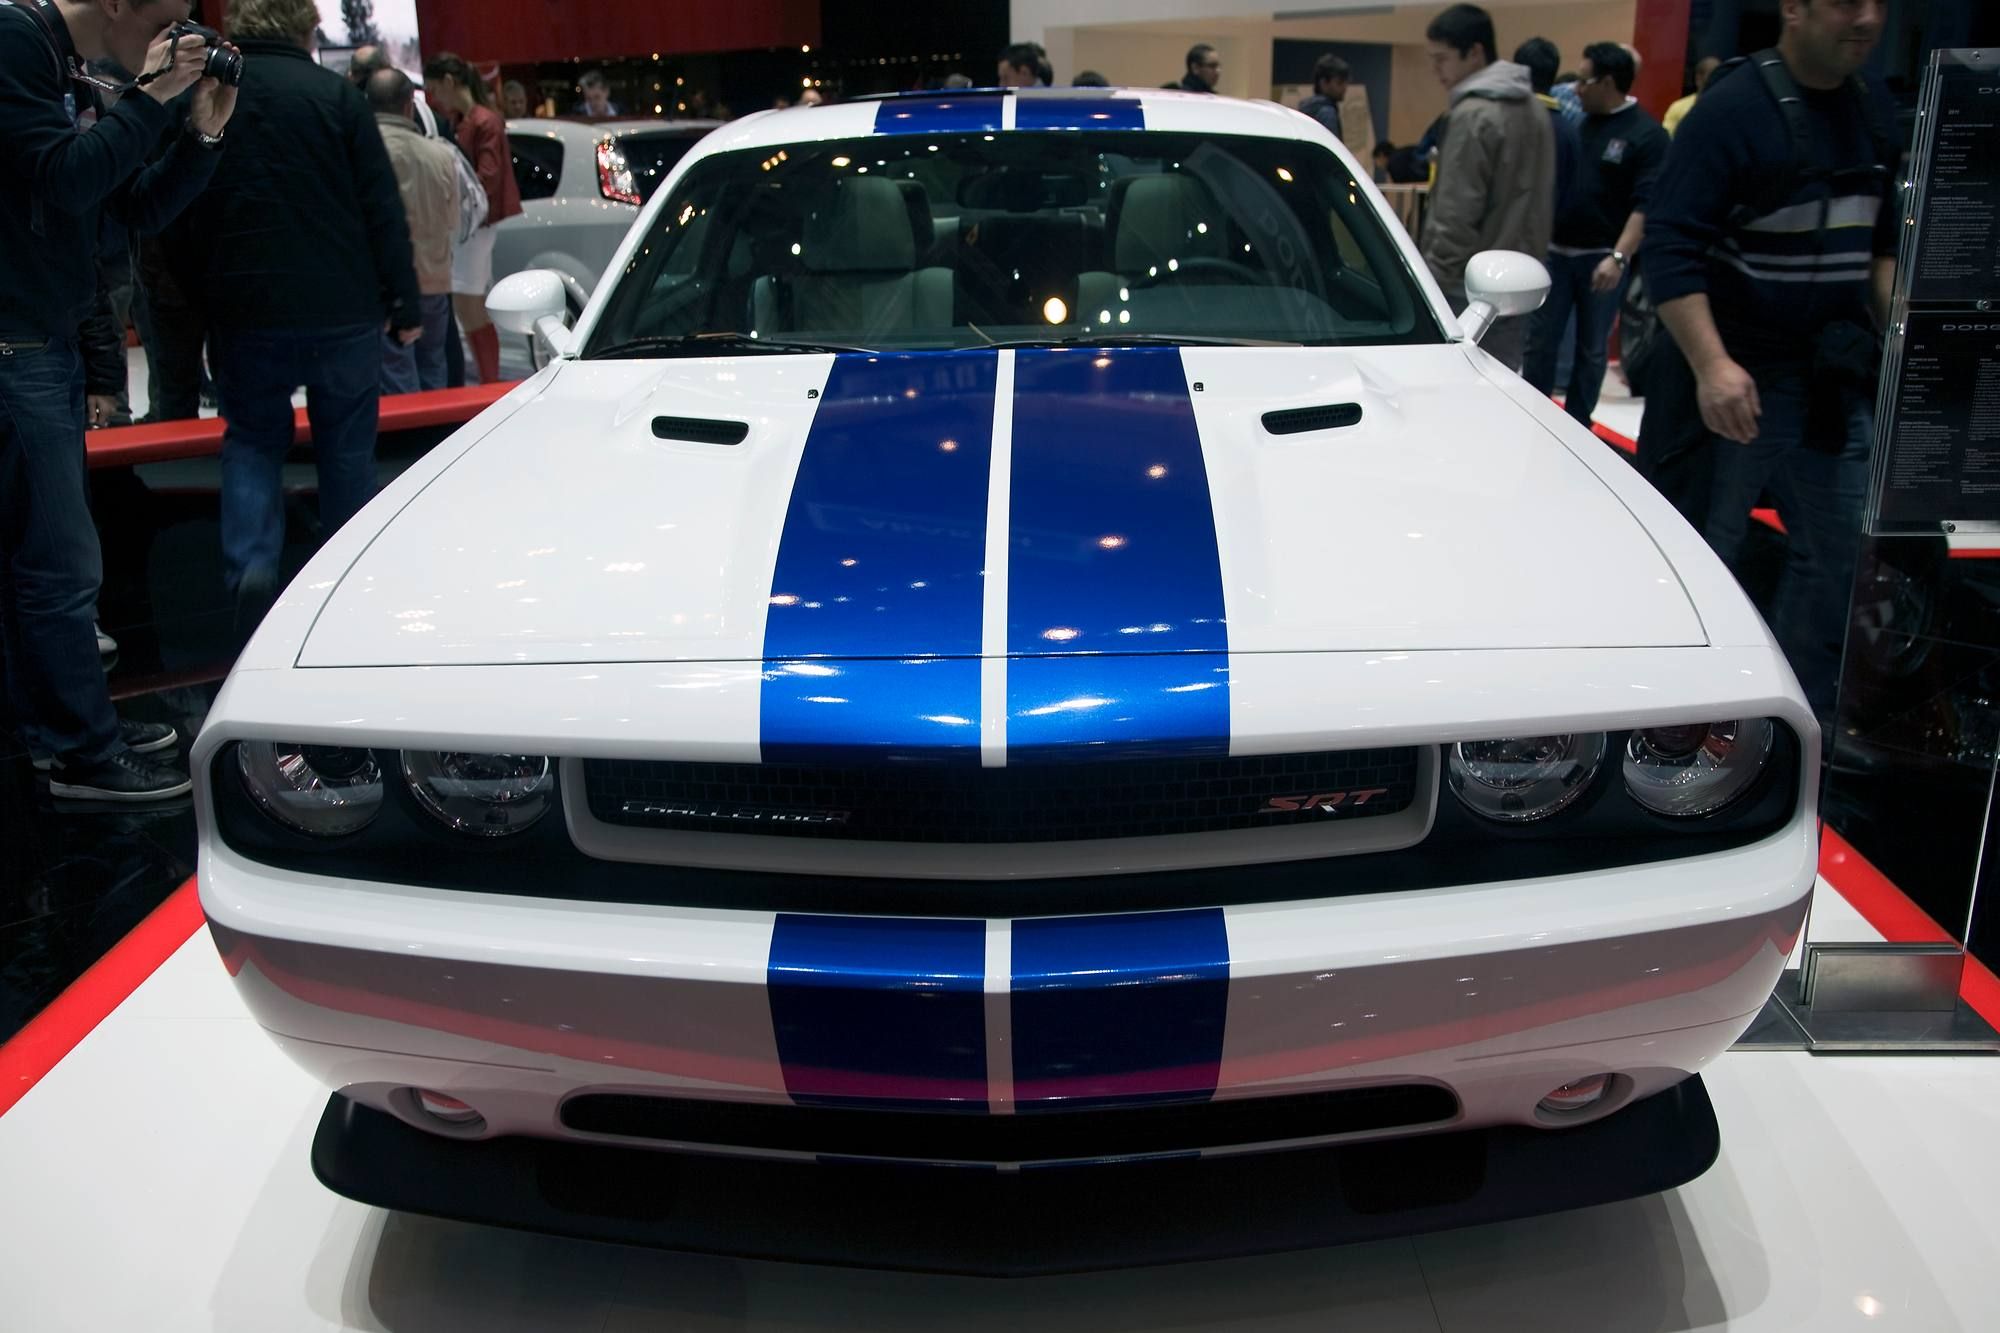 Does the Challenger hood scoop affect its performance?